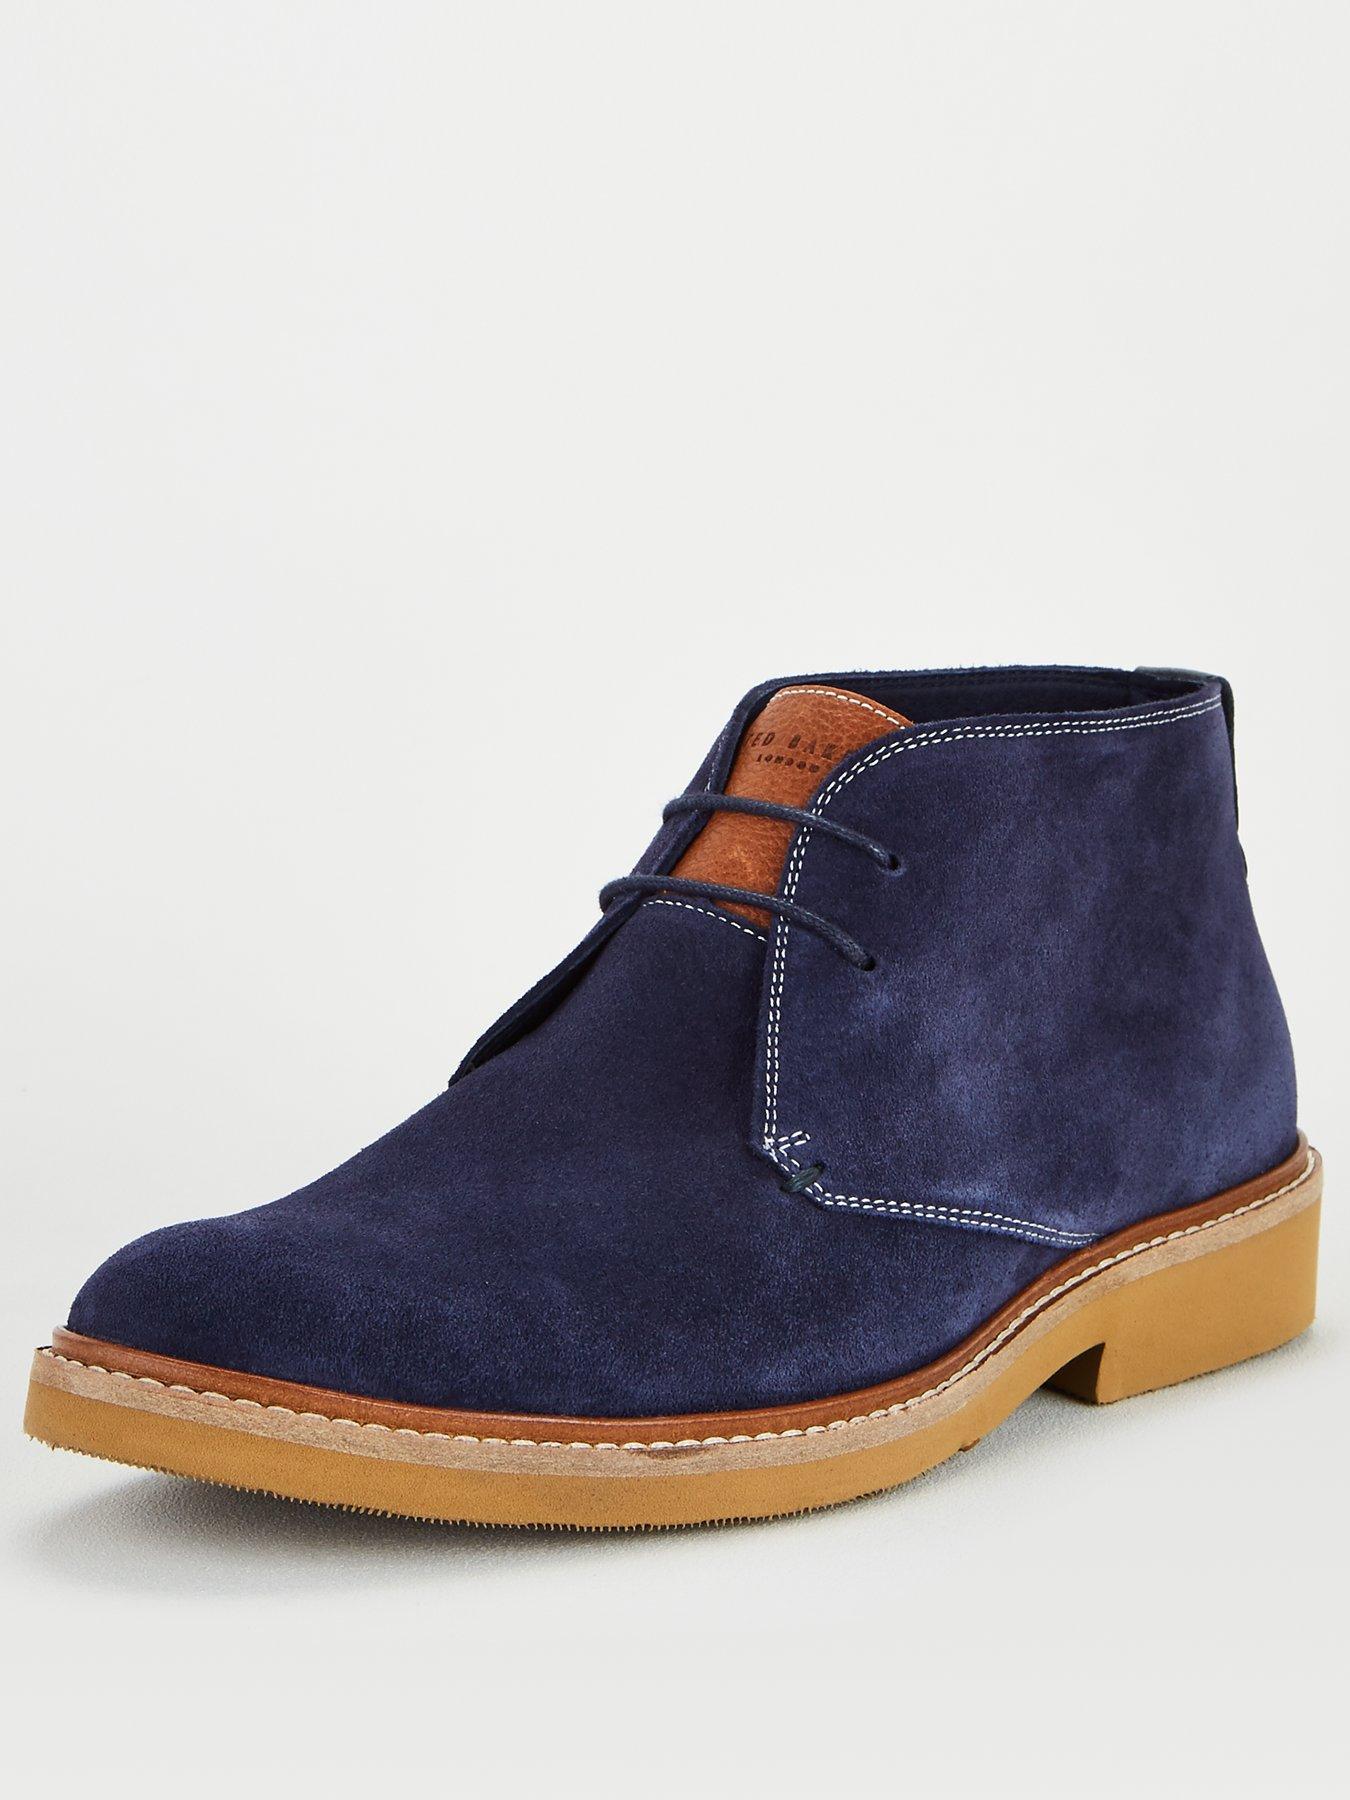 ted baker navy boots